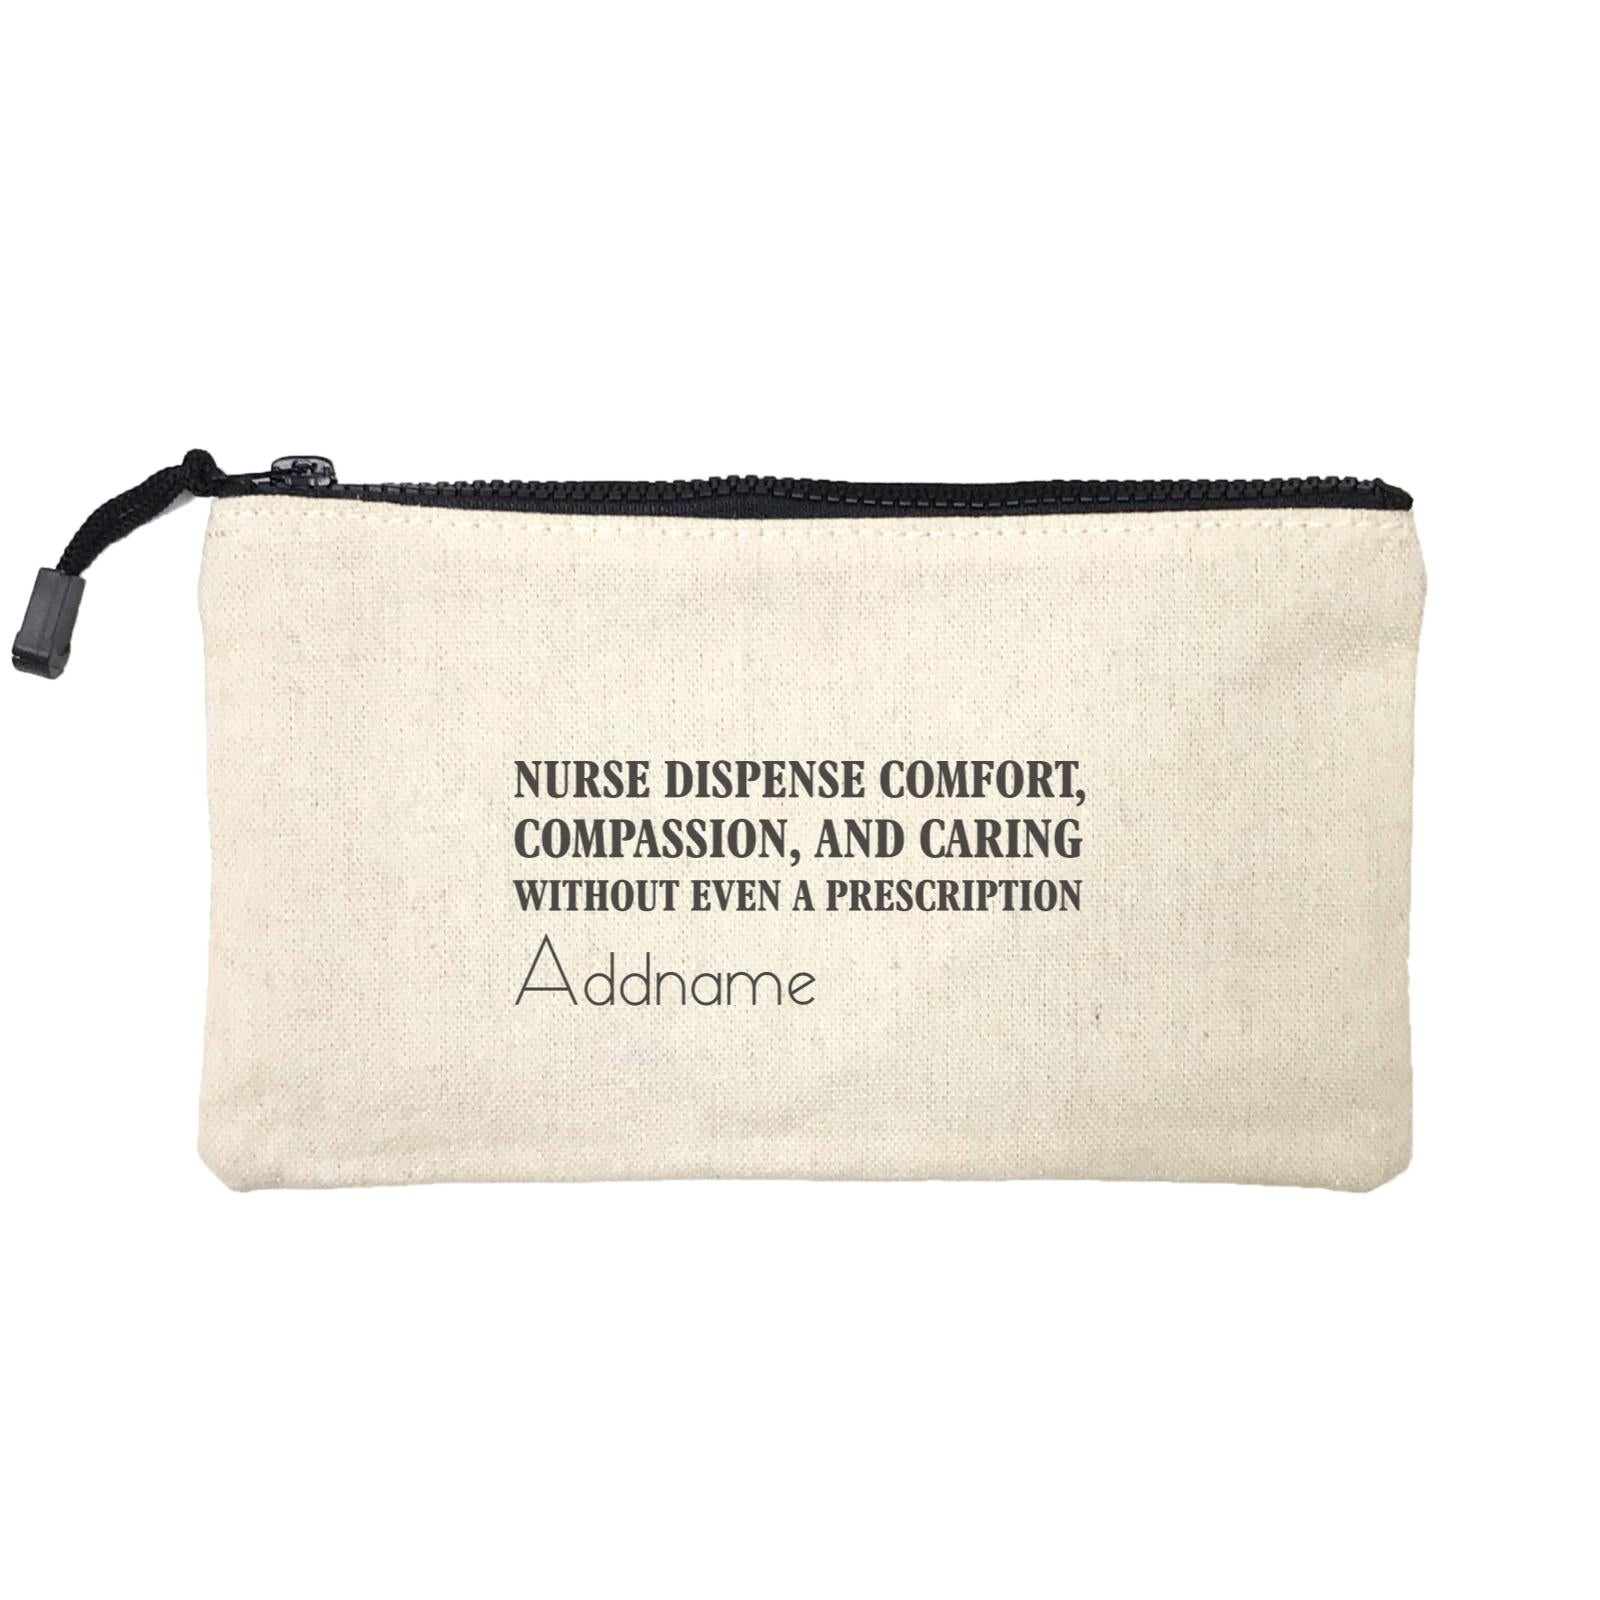 Nurse Dispense Comfort, Compassion, And Caring Without Even A Prescription Mini Accessories Stationery Pouch